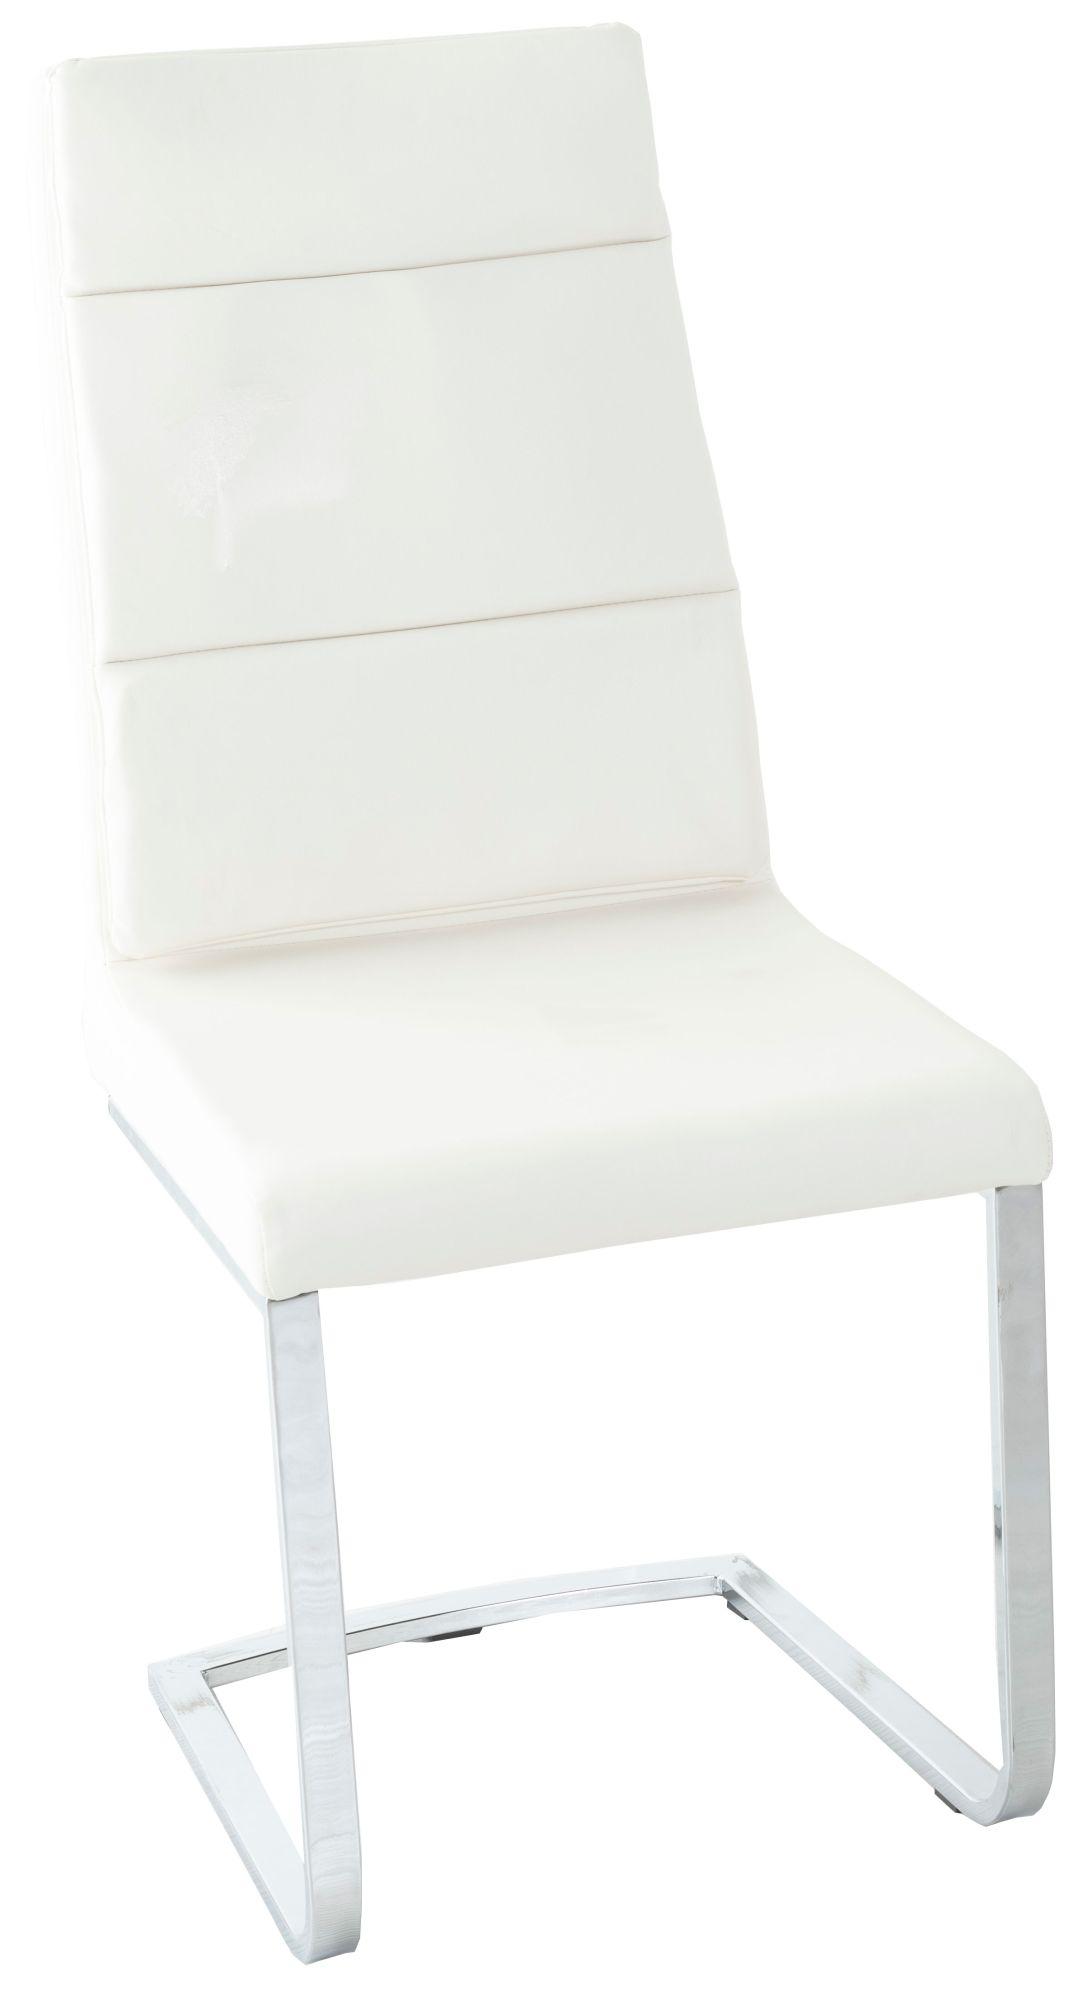 Arabella Cream Dining Chair, Leather - Faux PU with Stainless Steel Chrome Cantiliver Base